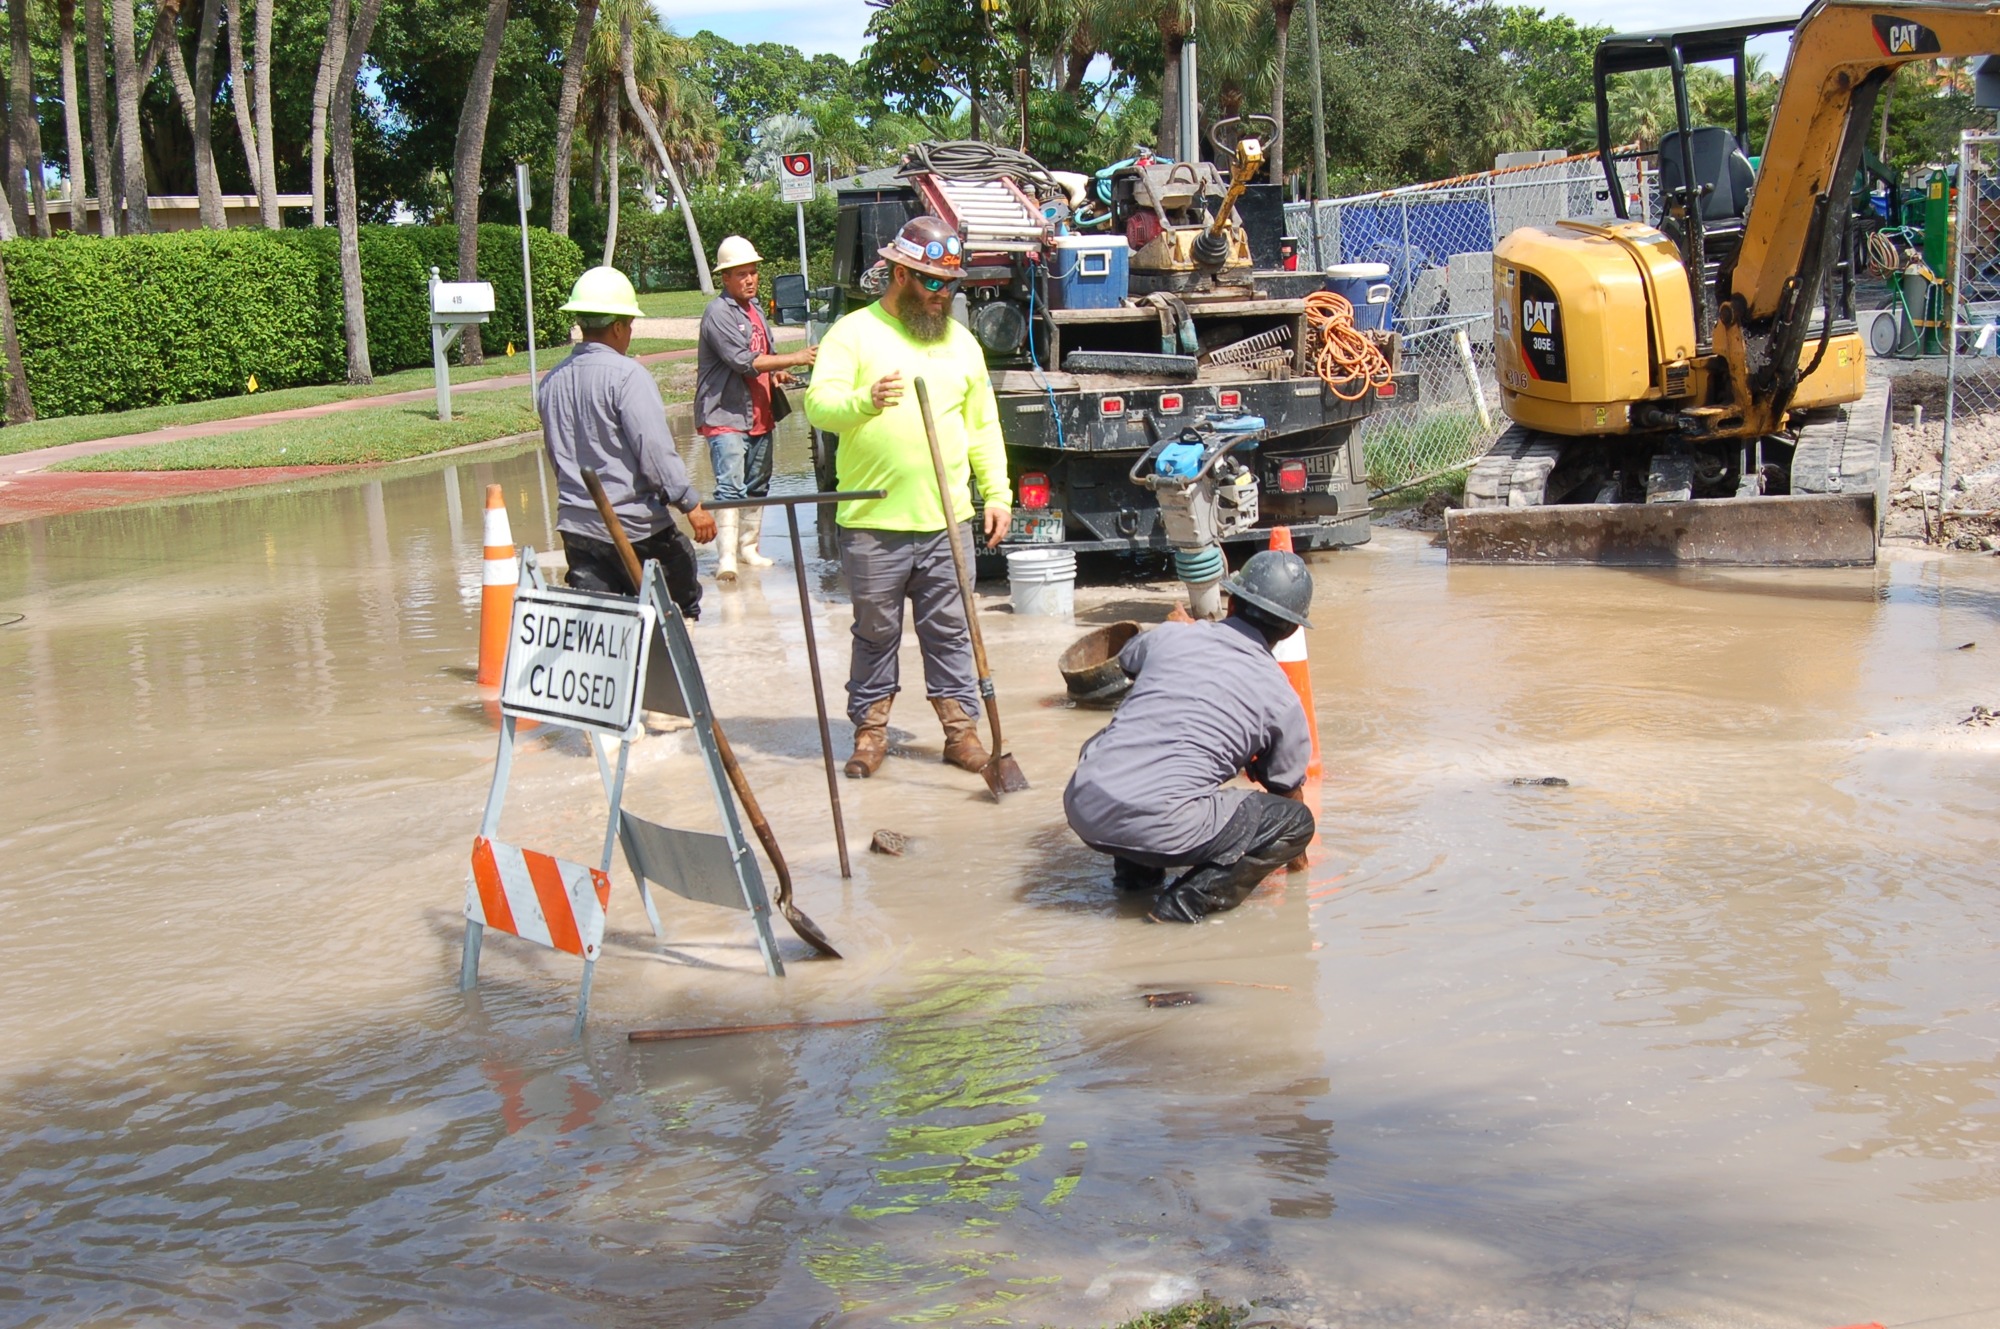 Crews work to cut off the water after a pipe break near the site of the St. Armands Circle parking garage construction project.